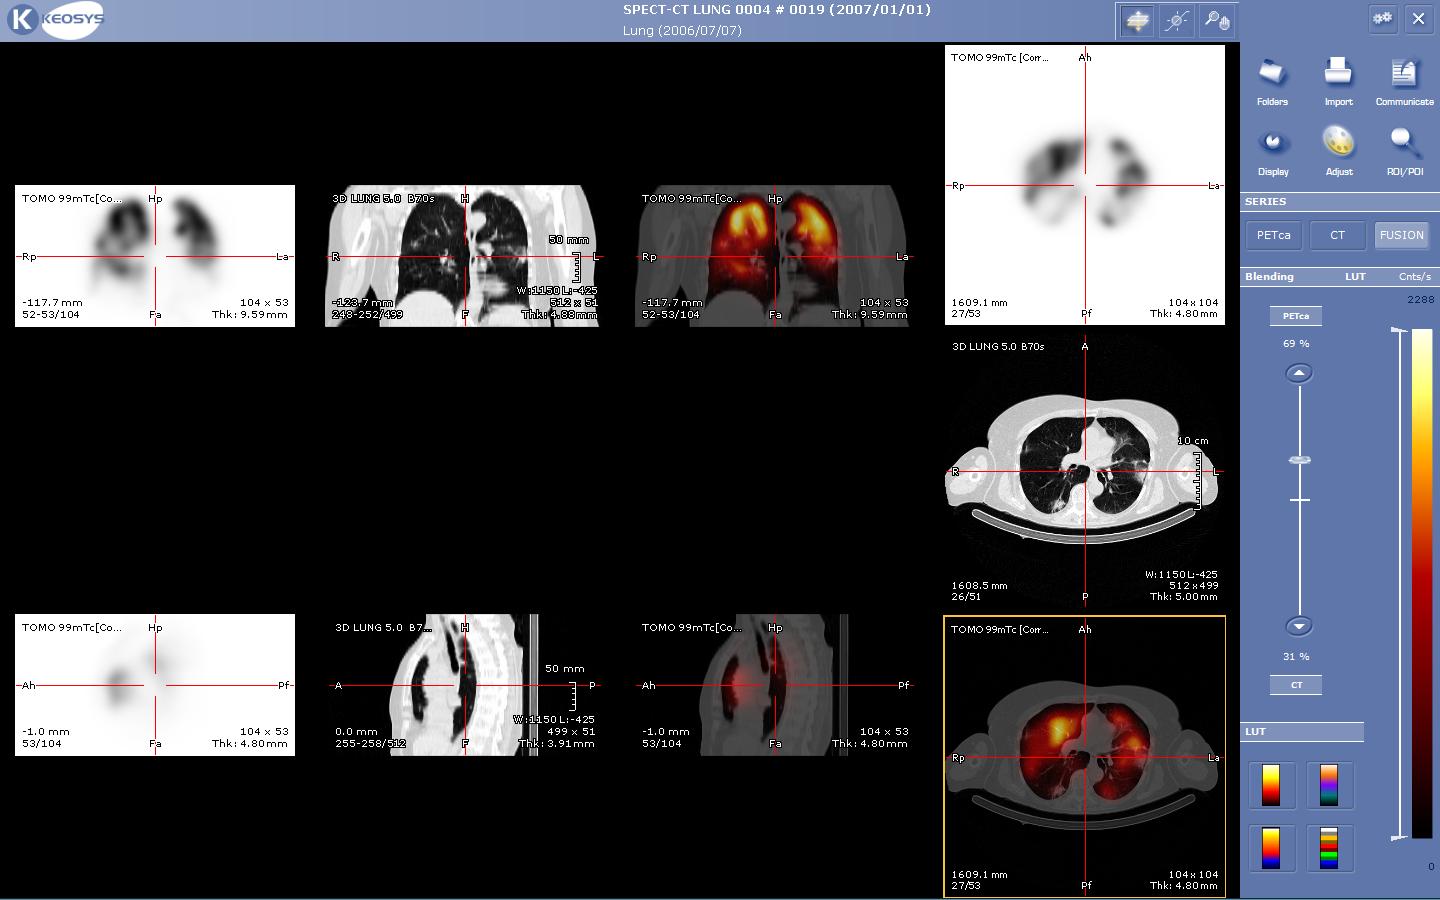 File:Lung SPECT-CT keosys format dicom.JPG